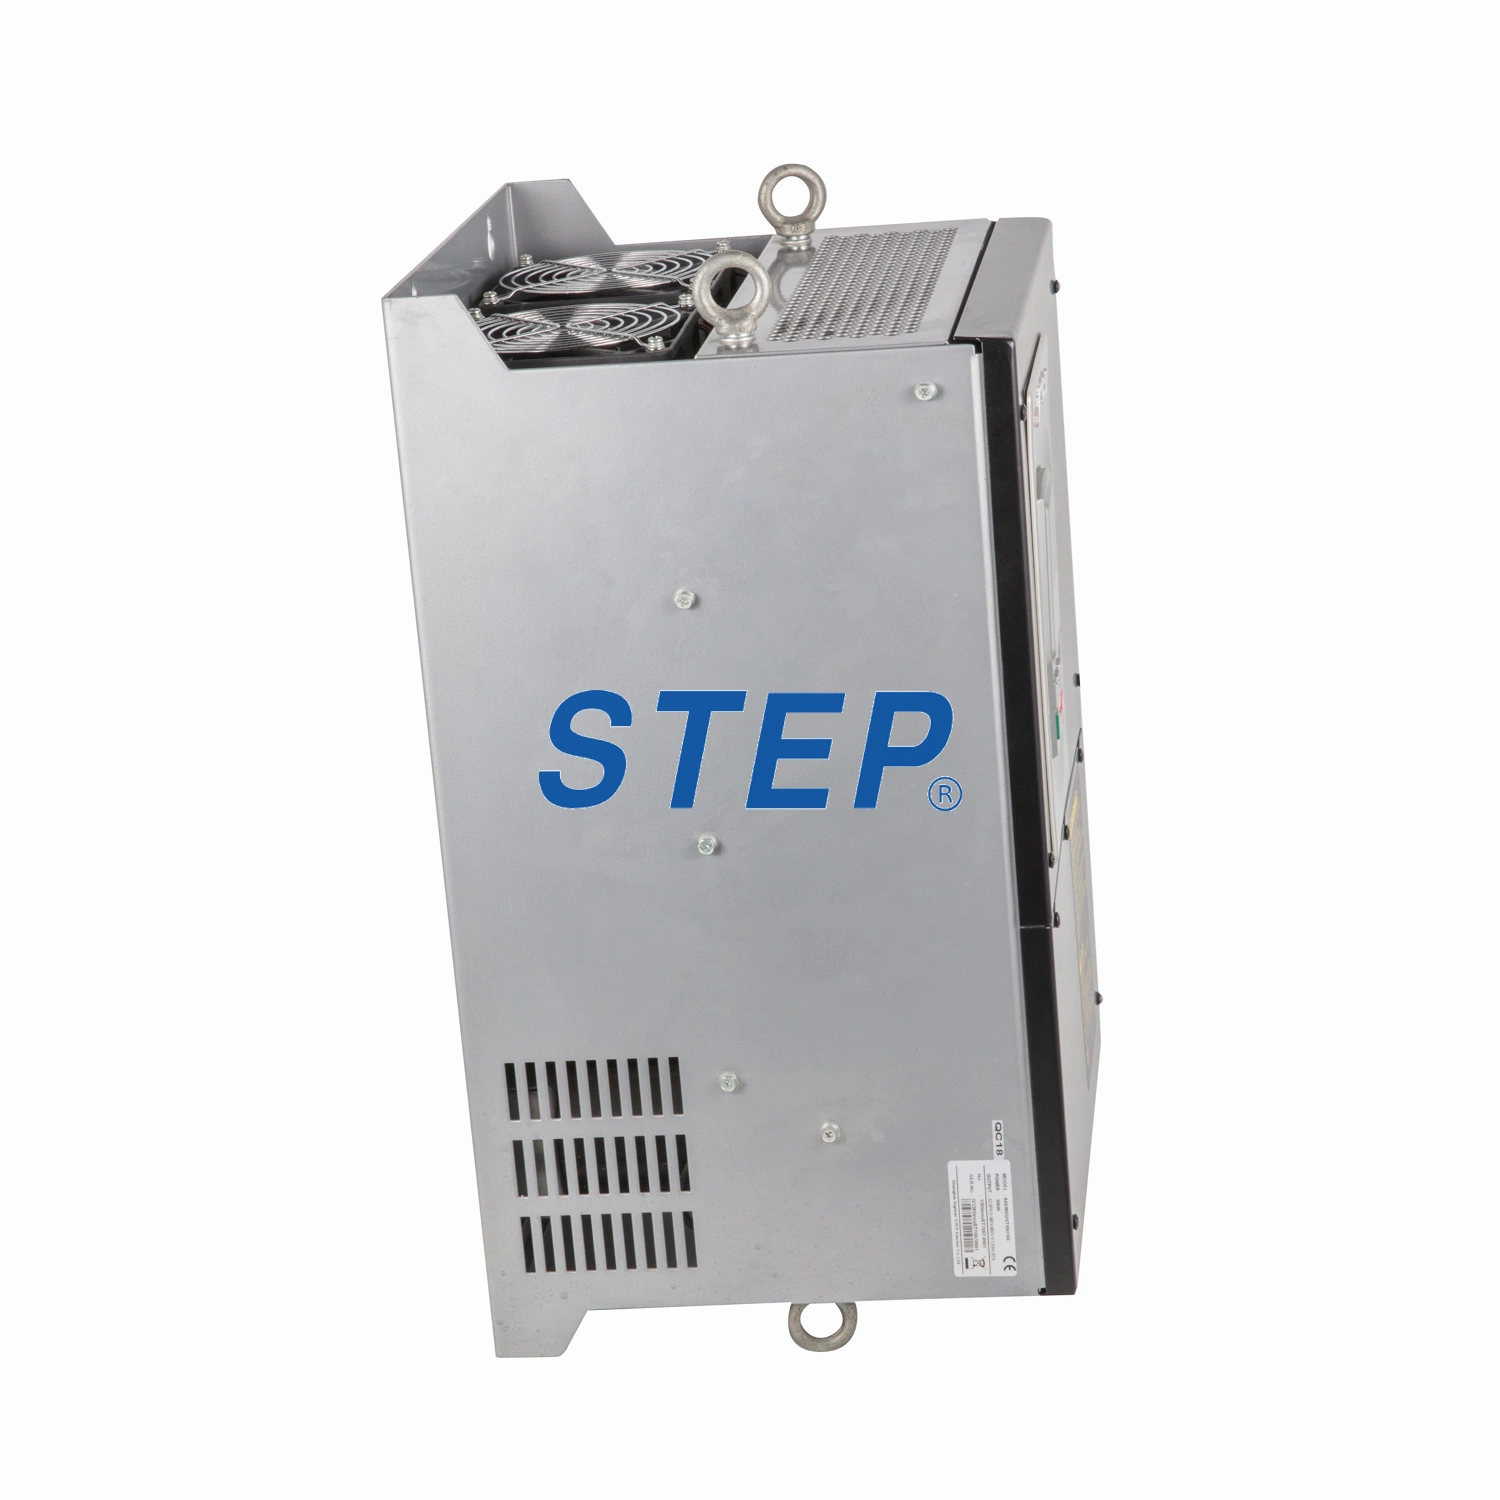 China Low Voltage Variable-Frequency Drive iAstar power saver ac motor speed controller vsd converter hot